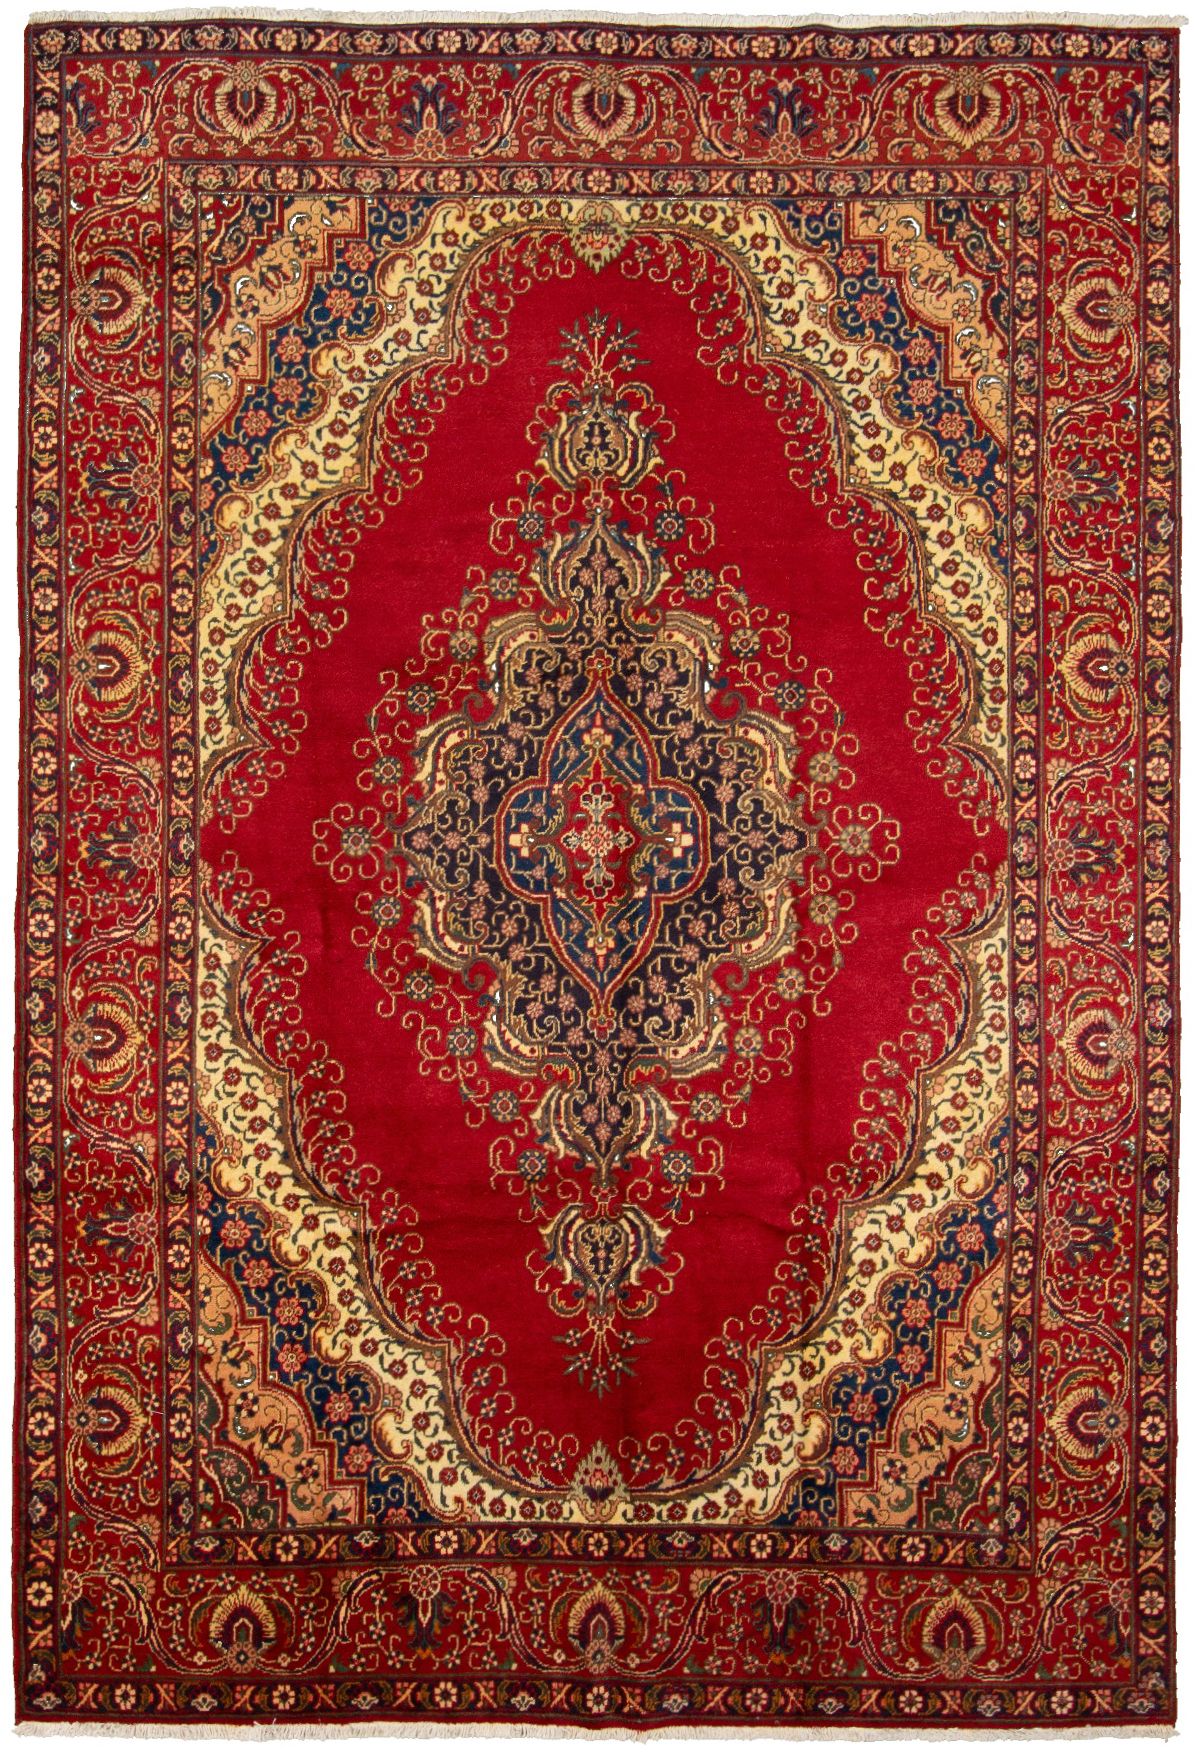 Hand-knotted Tabriz  Wool Rug 8'0" x 11'9" Size: 8'0" x 11'9"  